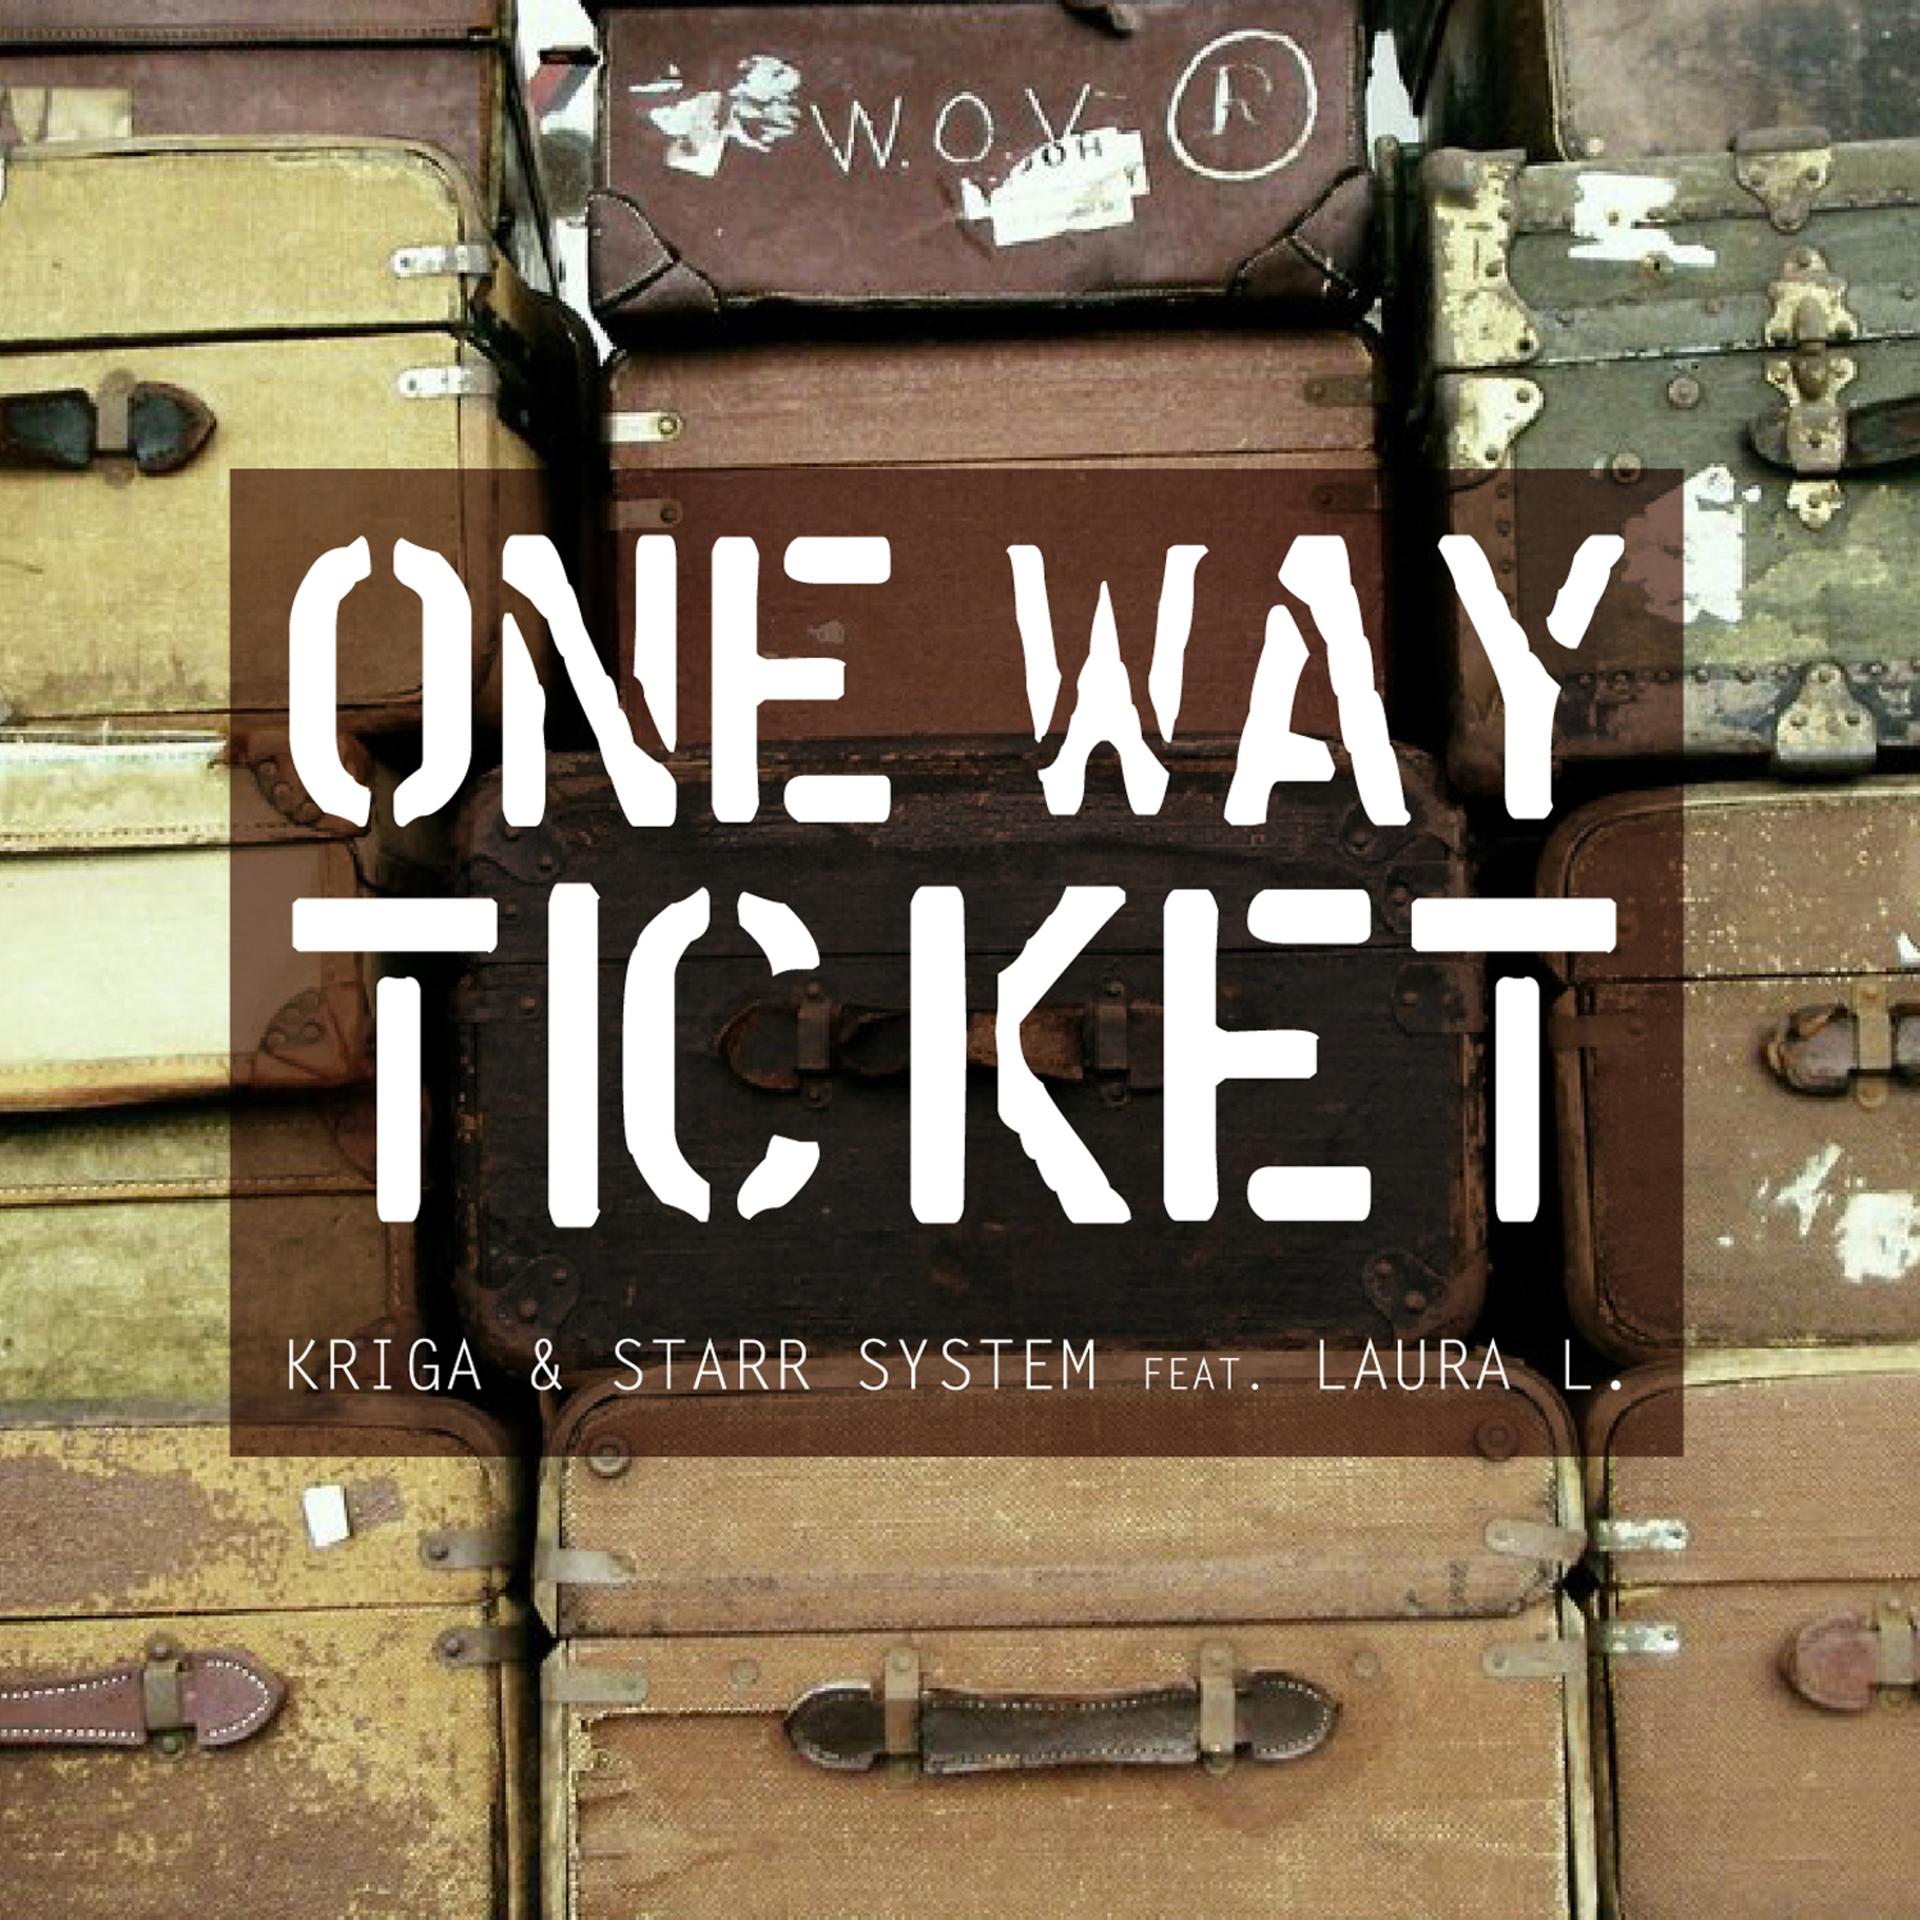 One way ticket. One way System обложка. Kriga & Laura ĺ.. One way ticket обложка. On one s way